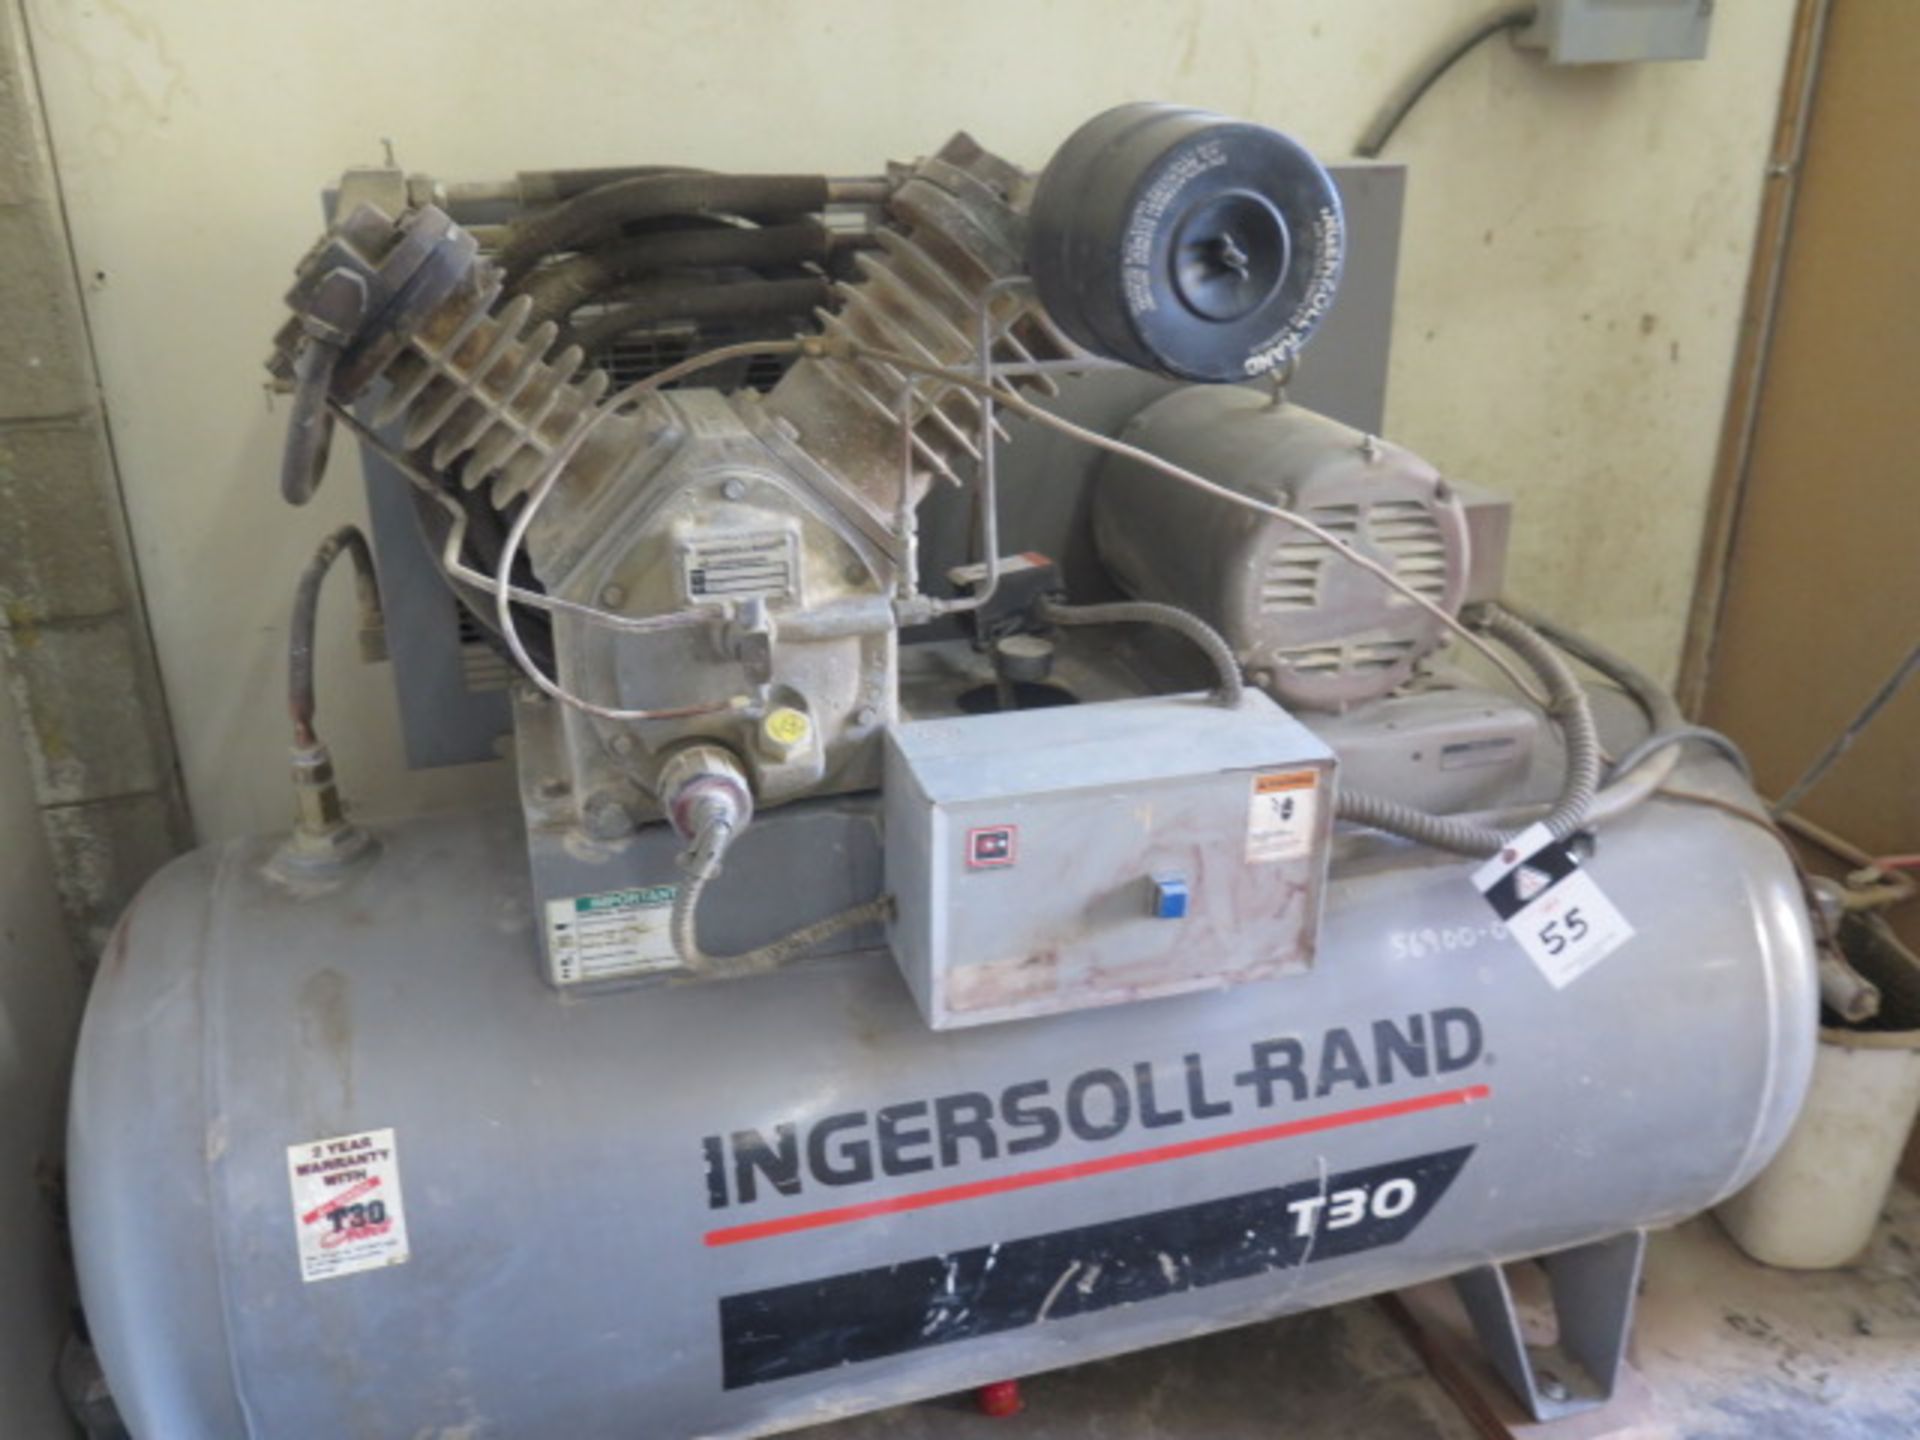 Ingersoll Rand T30 10/7.5Hp Horizontal Air Compressor w/ 2-Stage Pump, 80 Gallon SOLD AS IS - Image 3 of 7